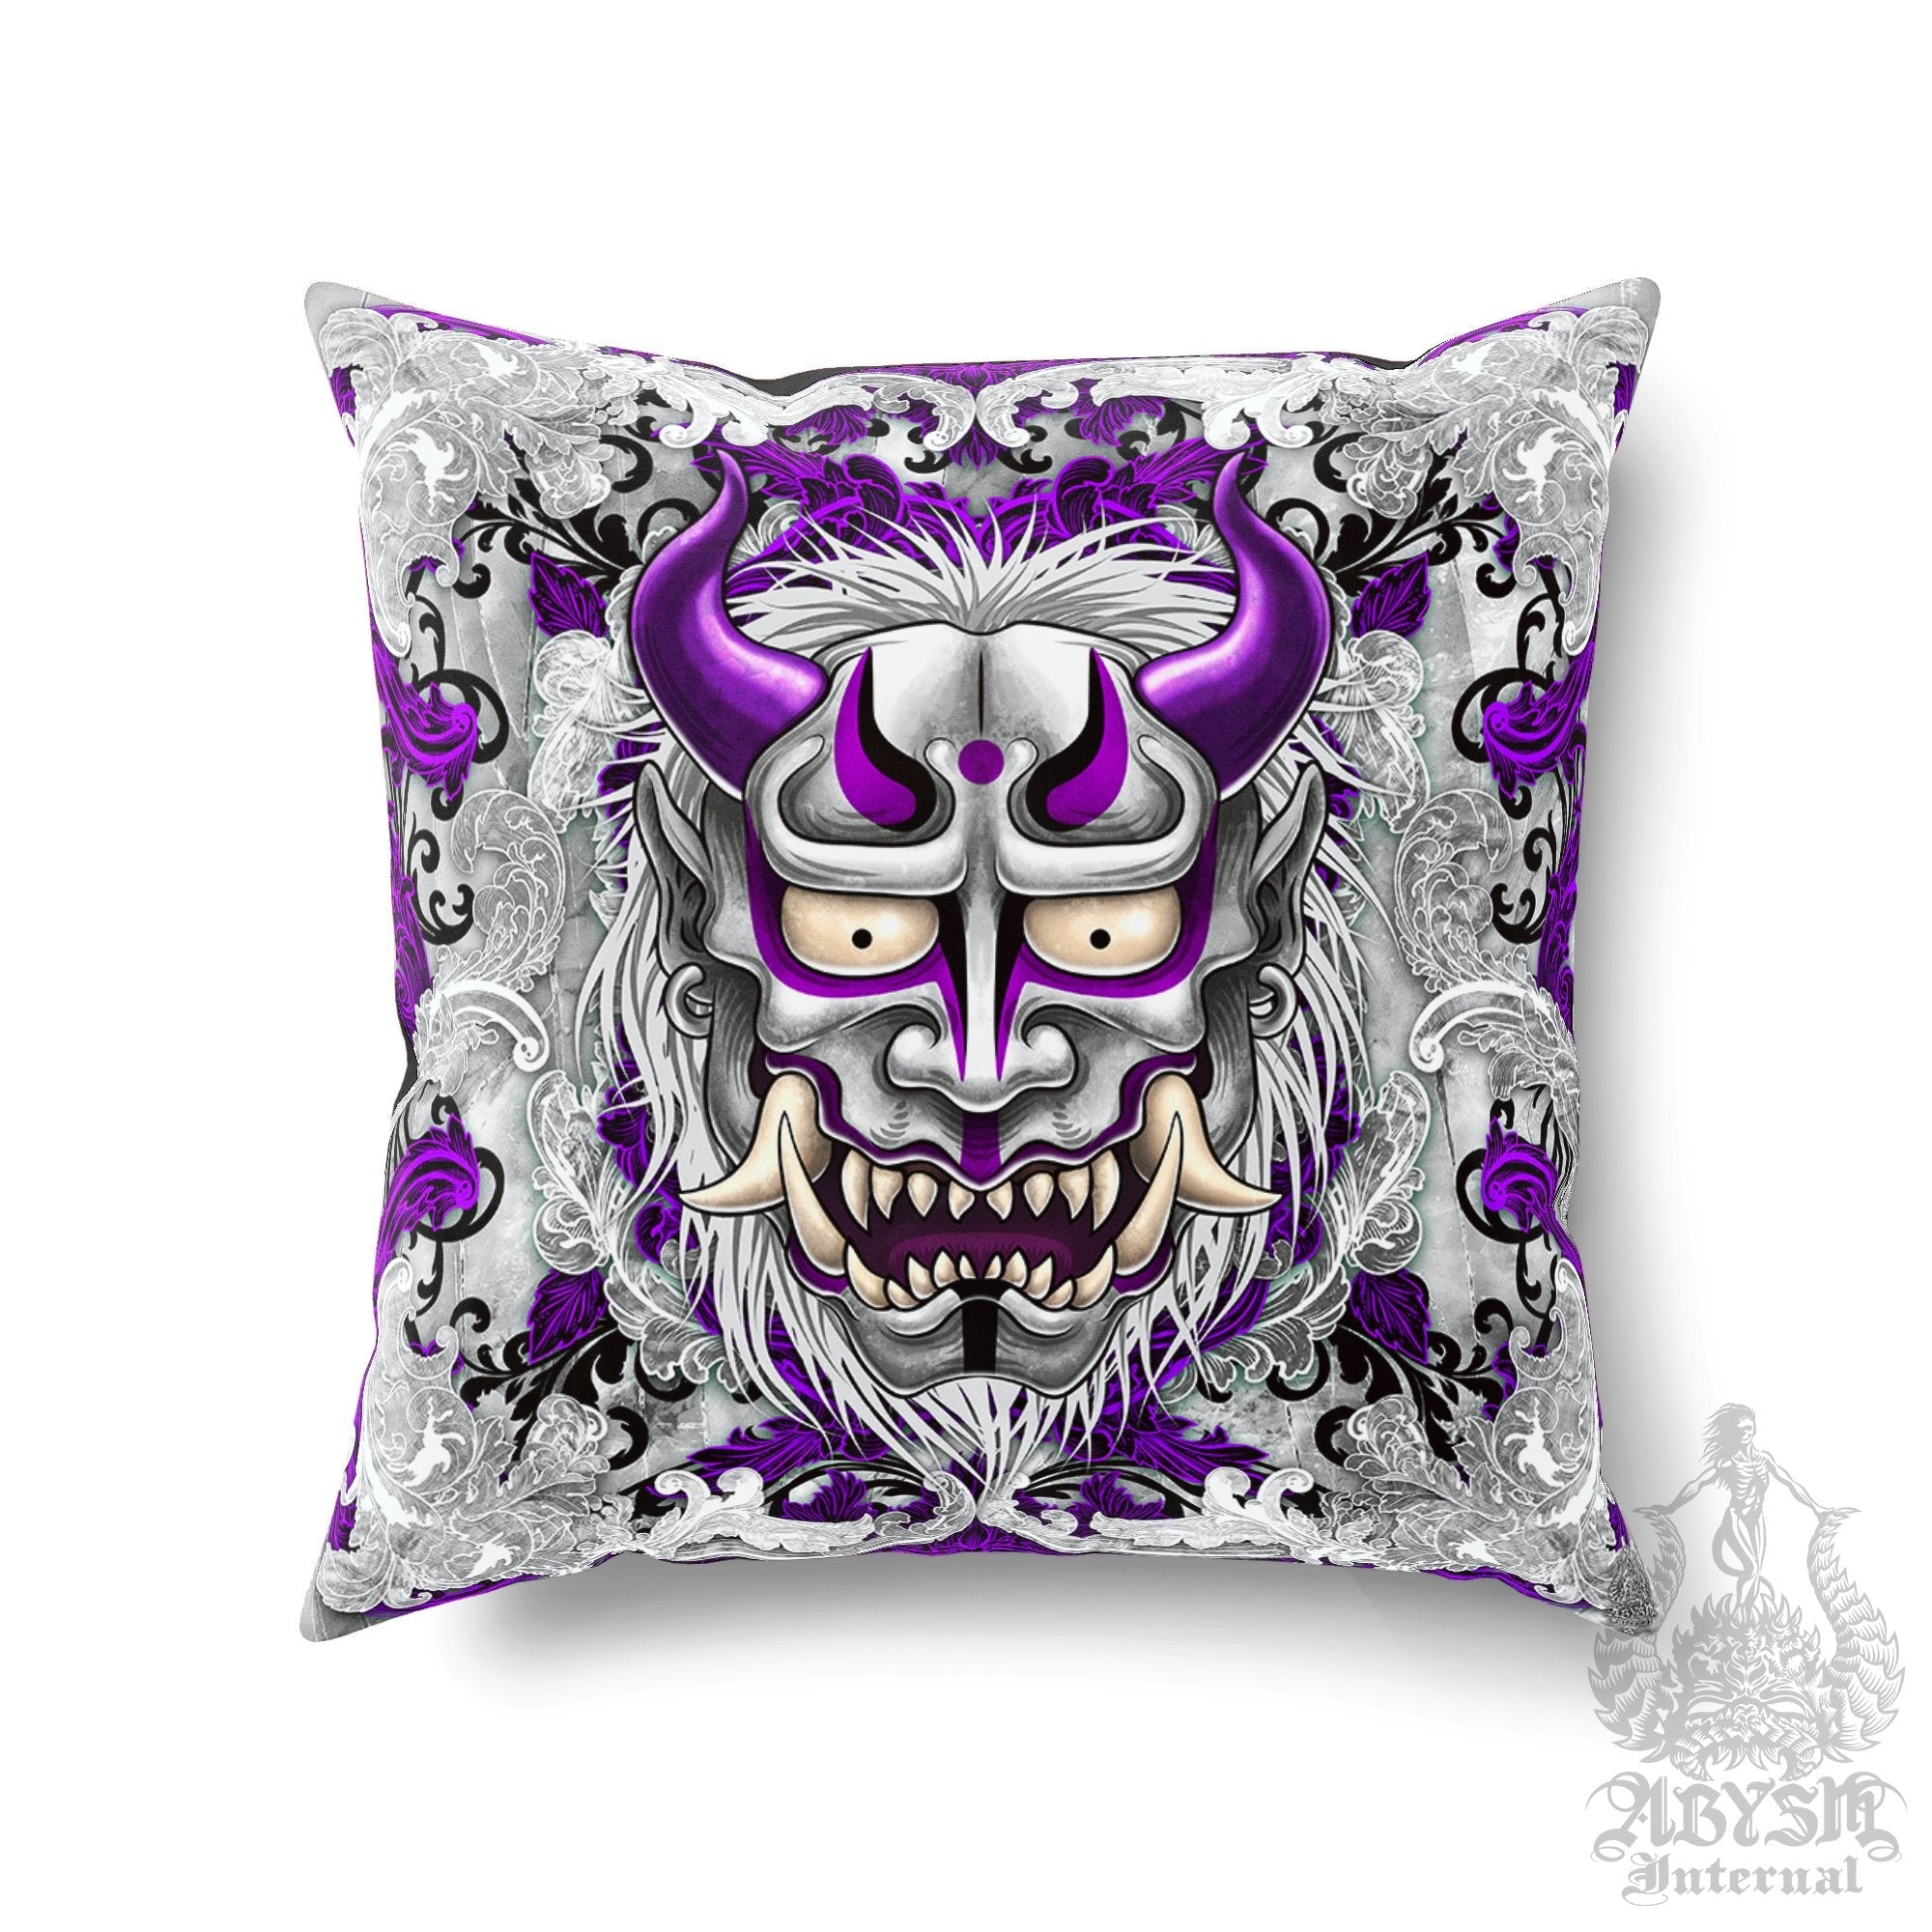 Oni Throw Pillow, Decorative Accent Cushion, Hannya, Japanese Demon, Anime and Gamer Room Decor, Alternative Home - White & Pastel Goth - Abysm Internal